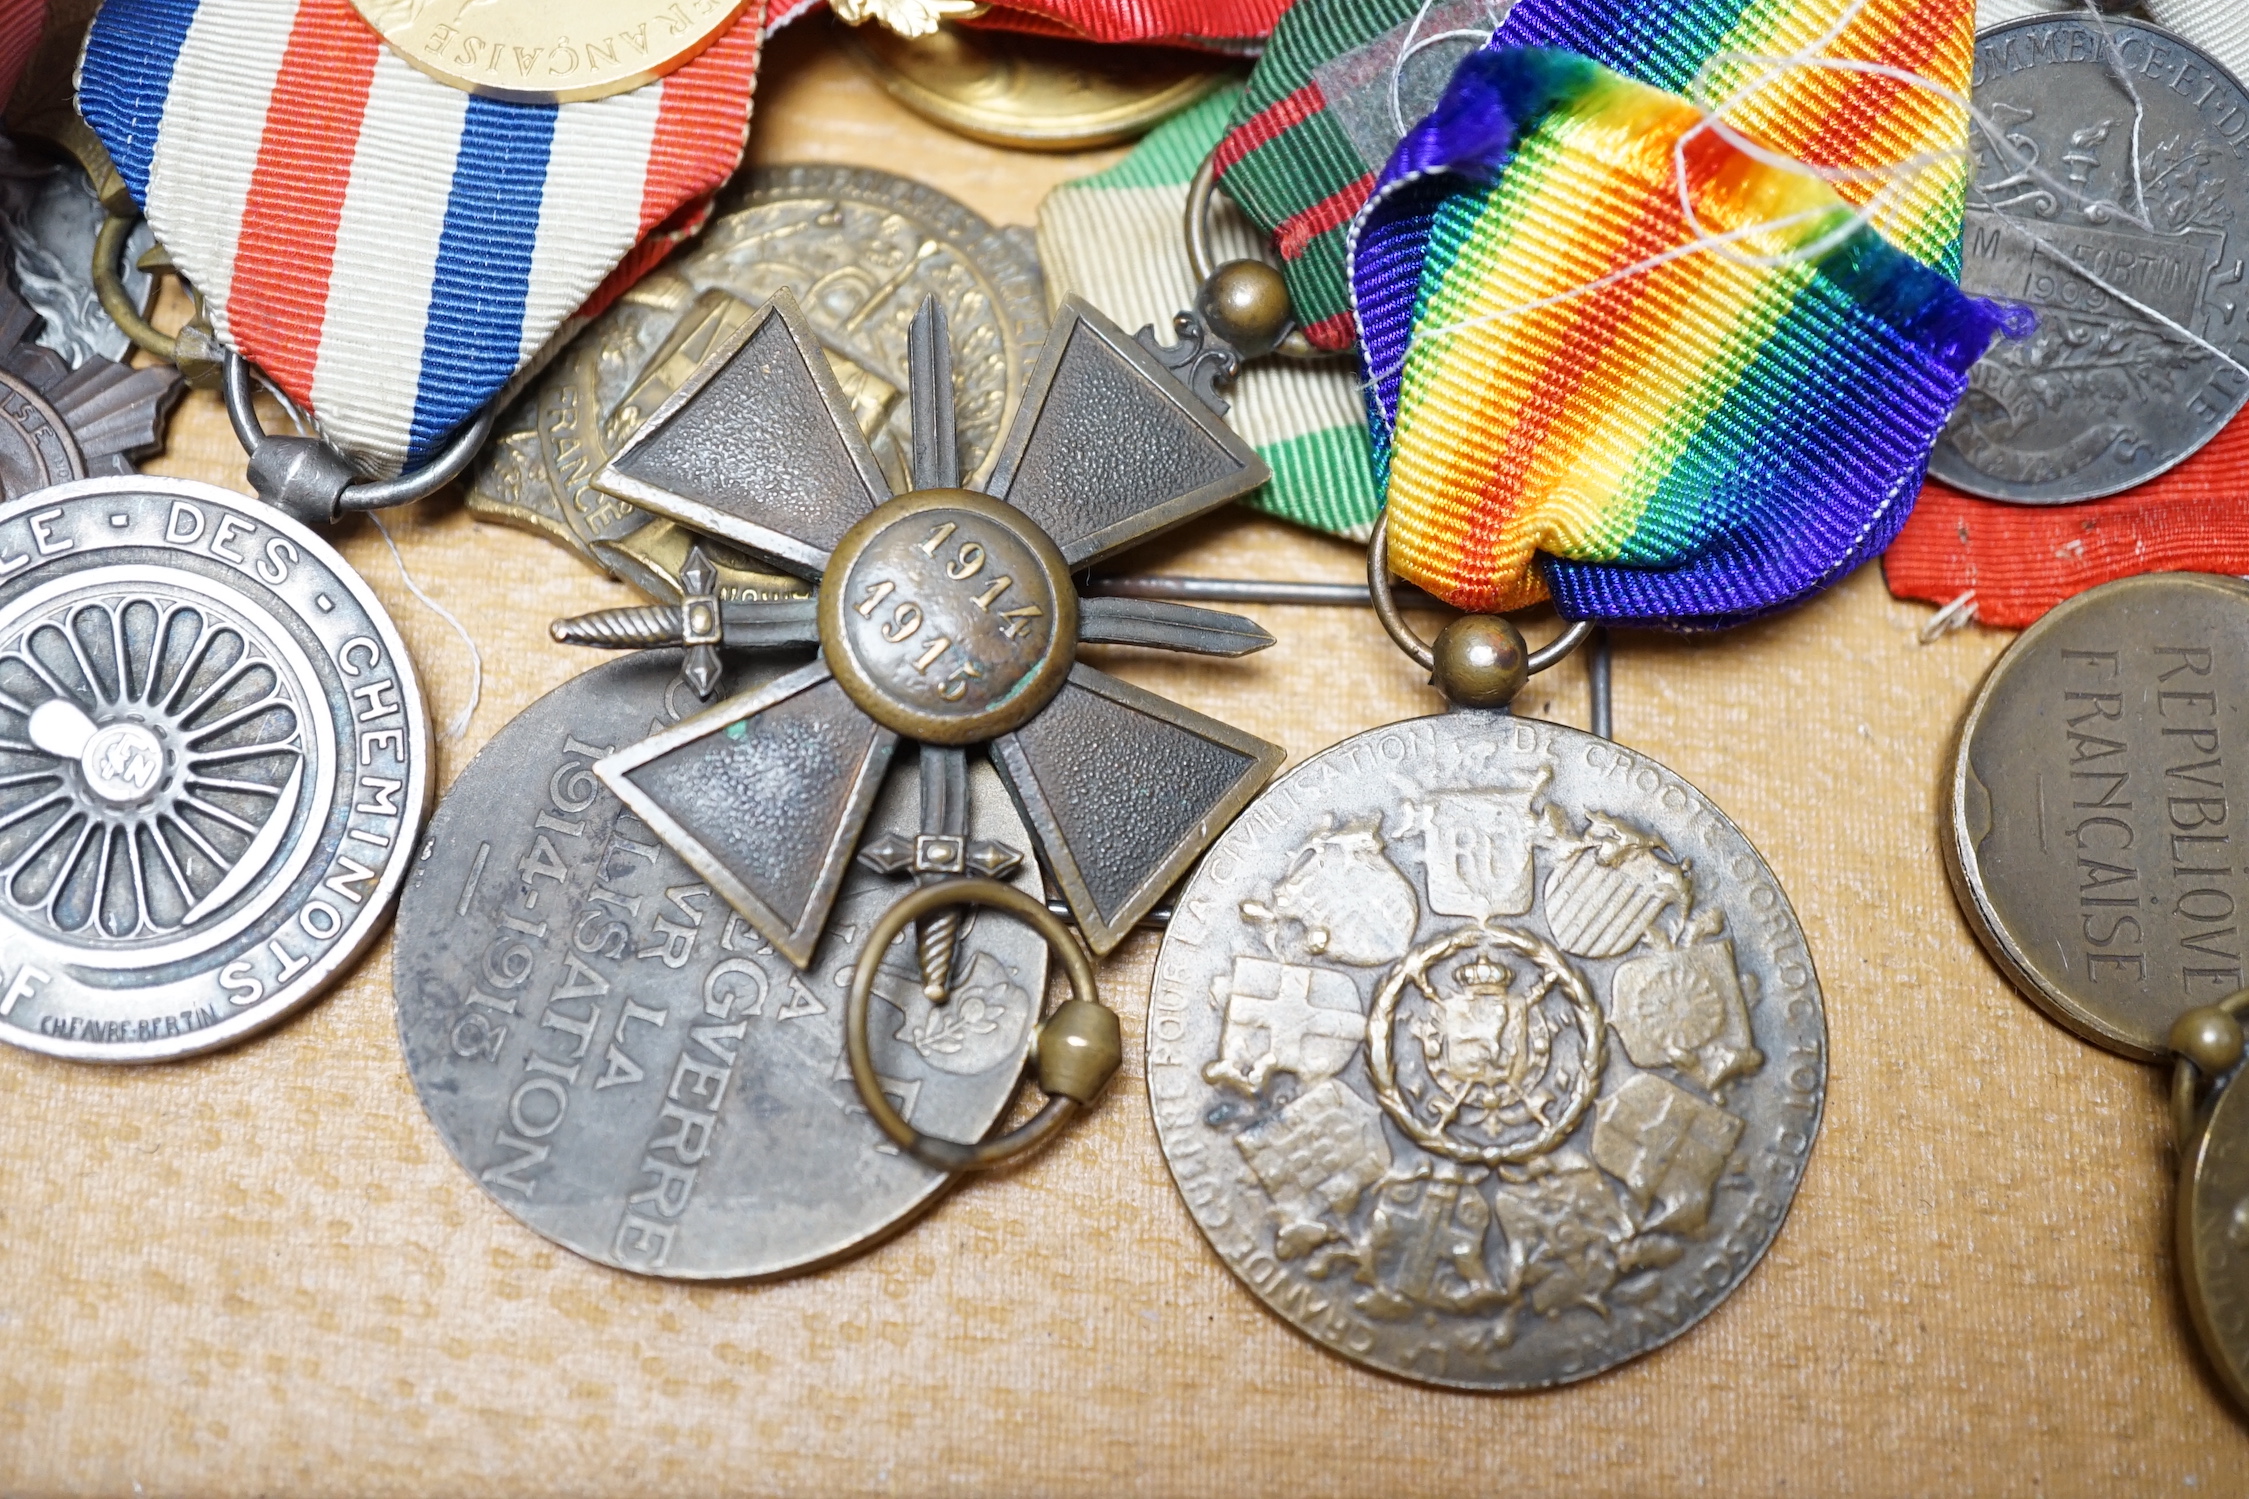 Eighteen French and Belgium medals, etc. including; Medal of Honour, War Cross, Medal of Honour - Image 3 of 17